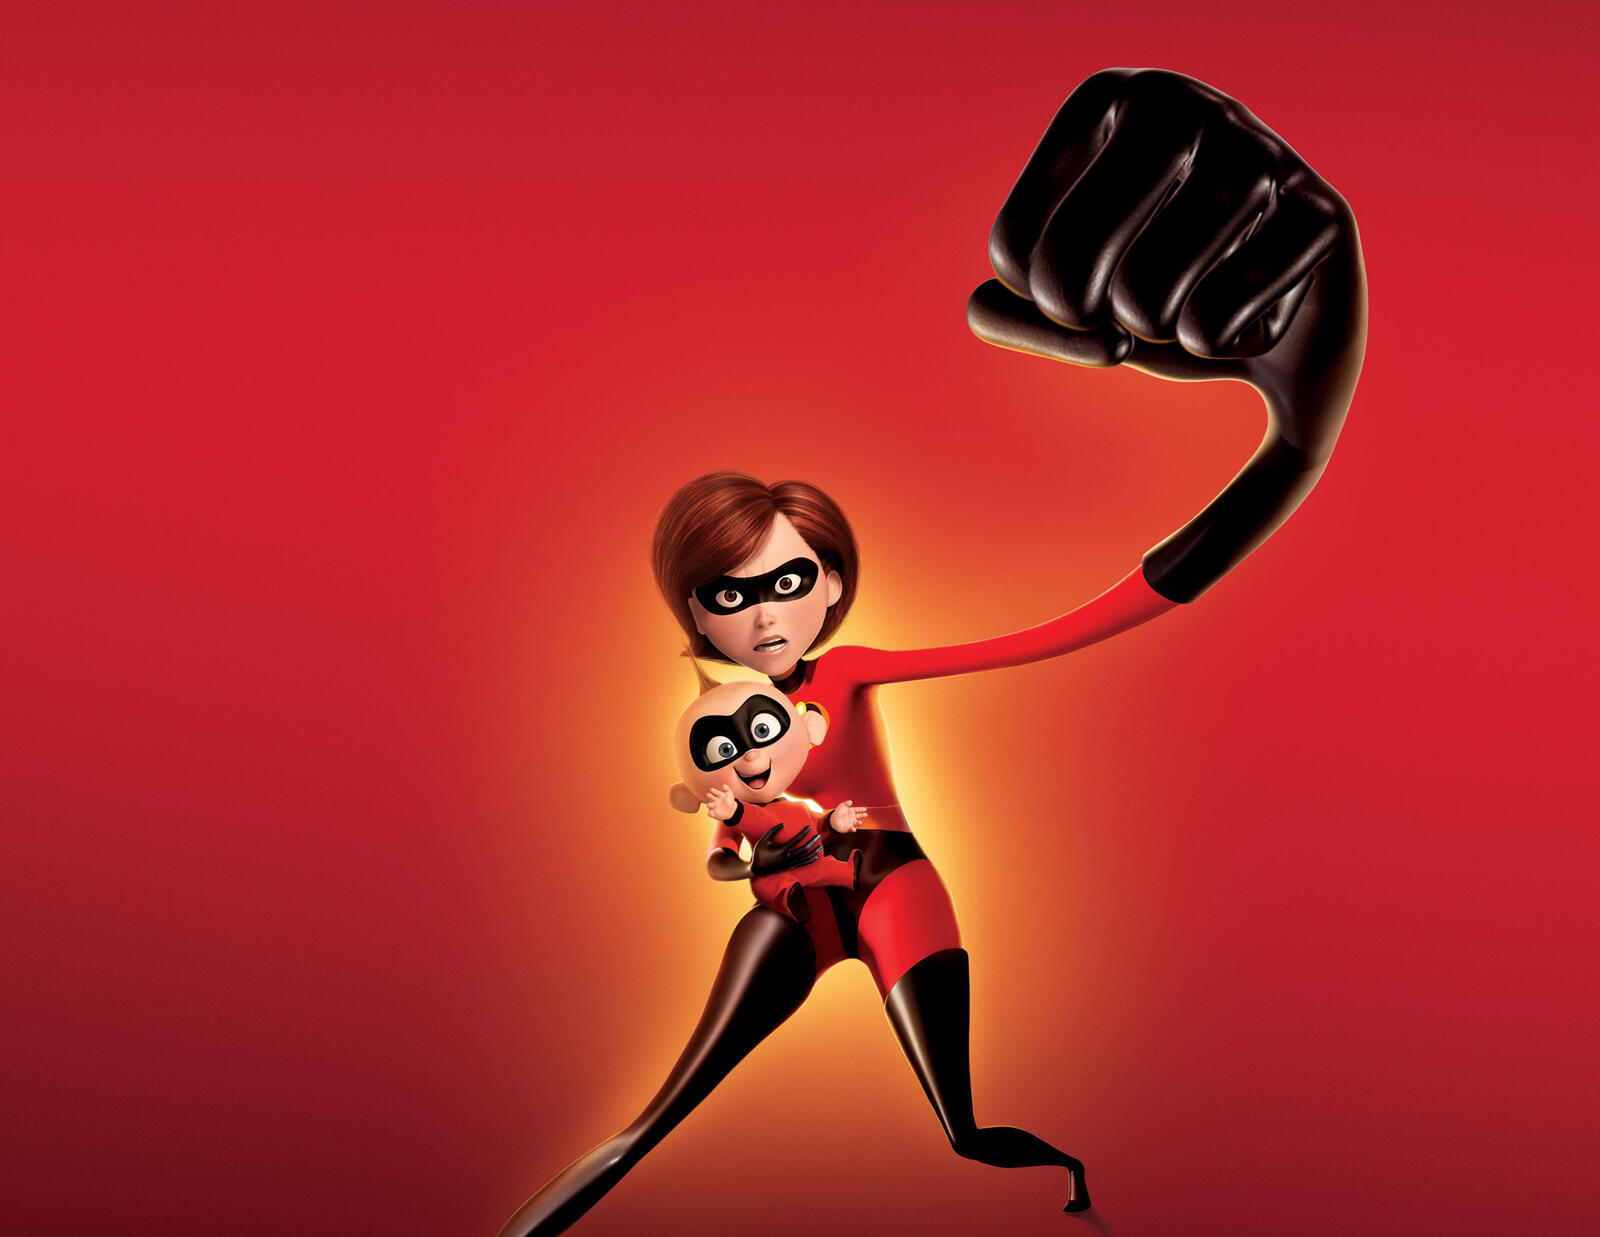 Wallpapers movies The Incredibles 2 rendering on the desktop